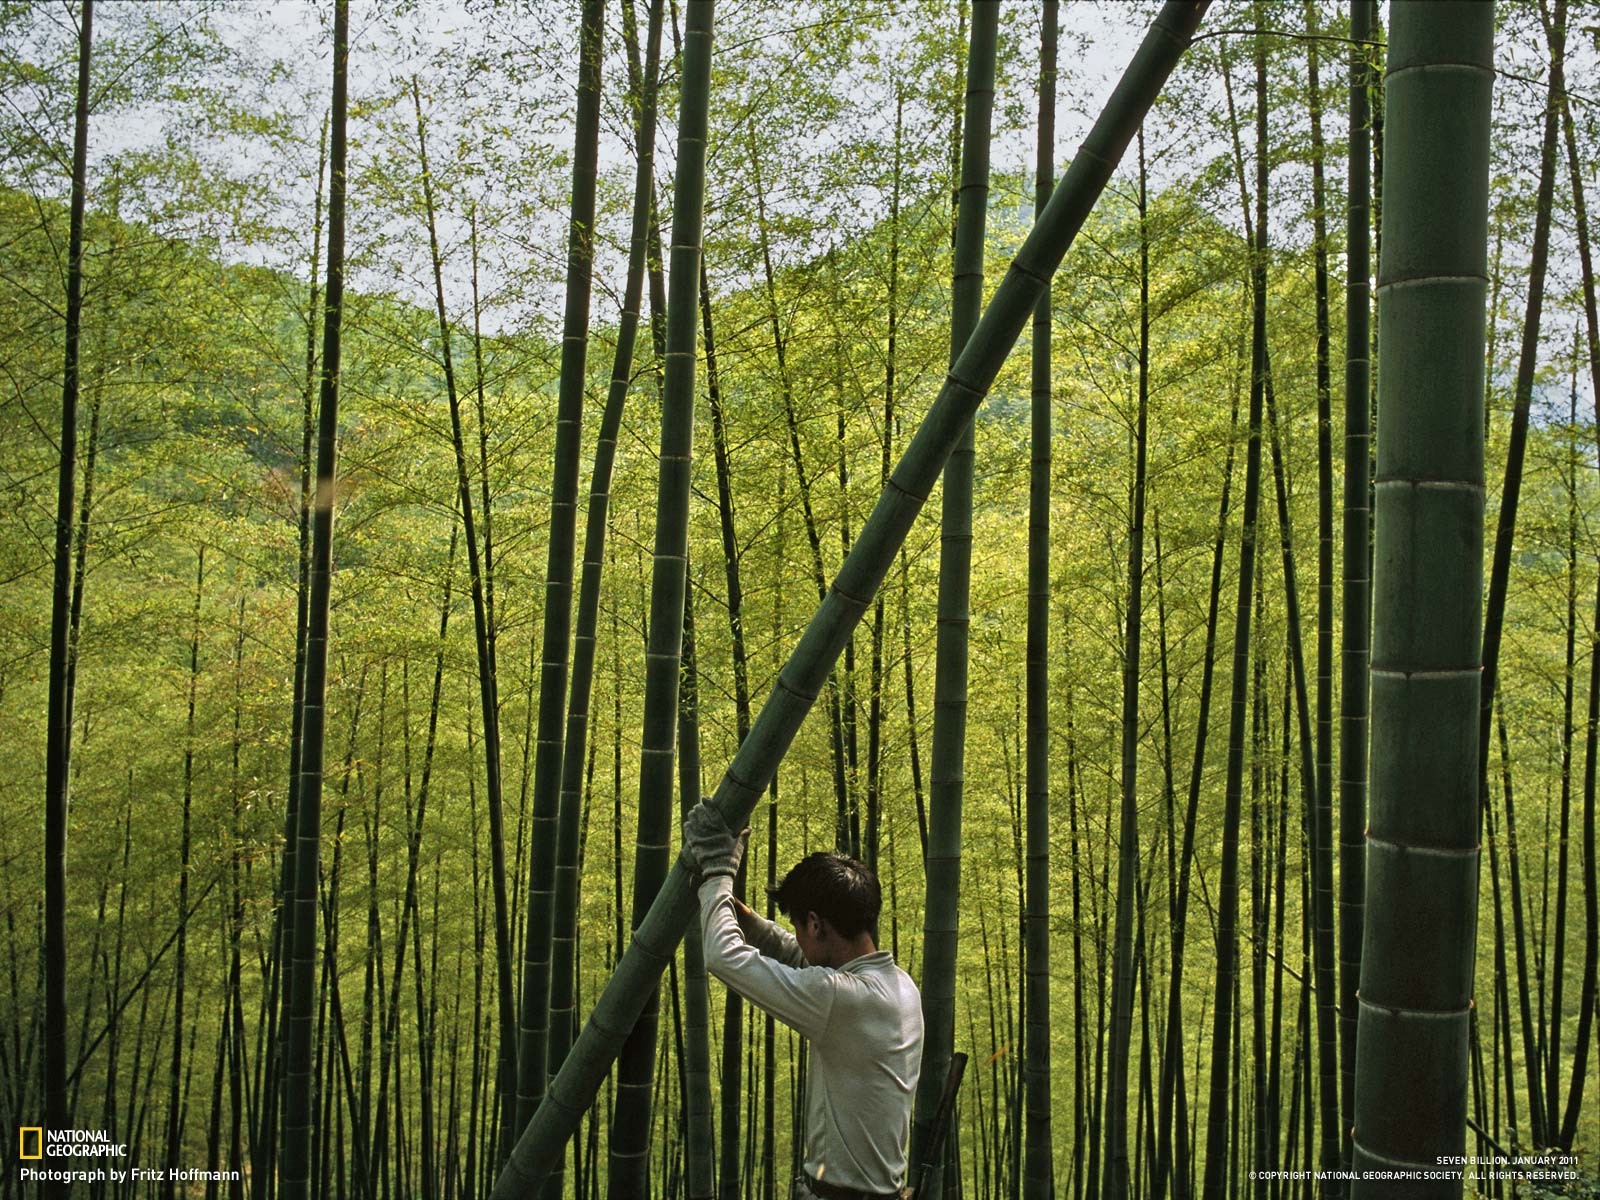 General 1600x1200 bamboo National Geographic 2011 (Year) plants trees men Asia outdoors